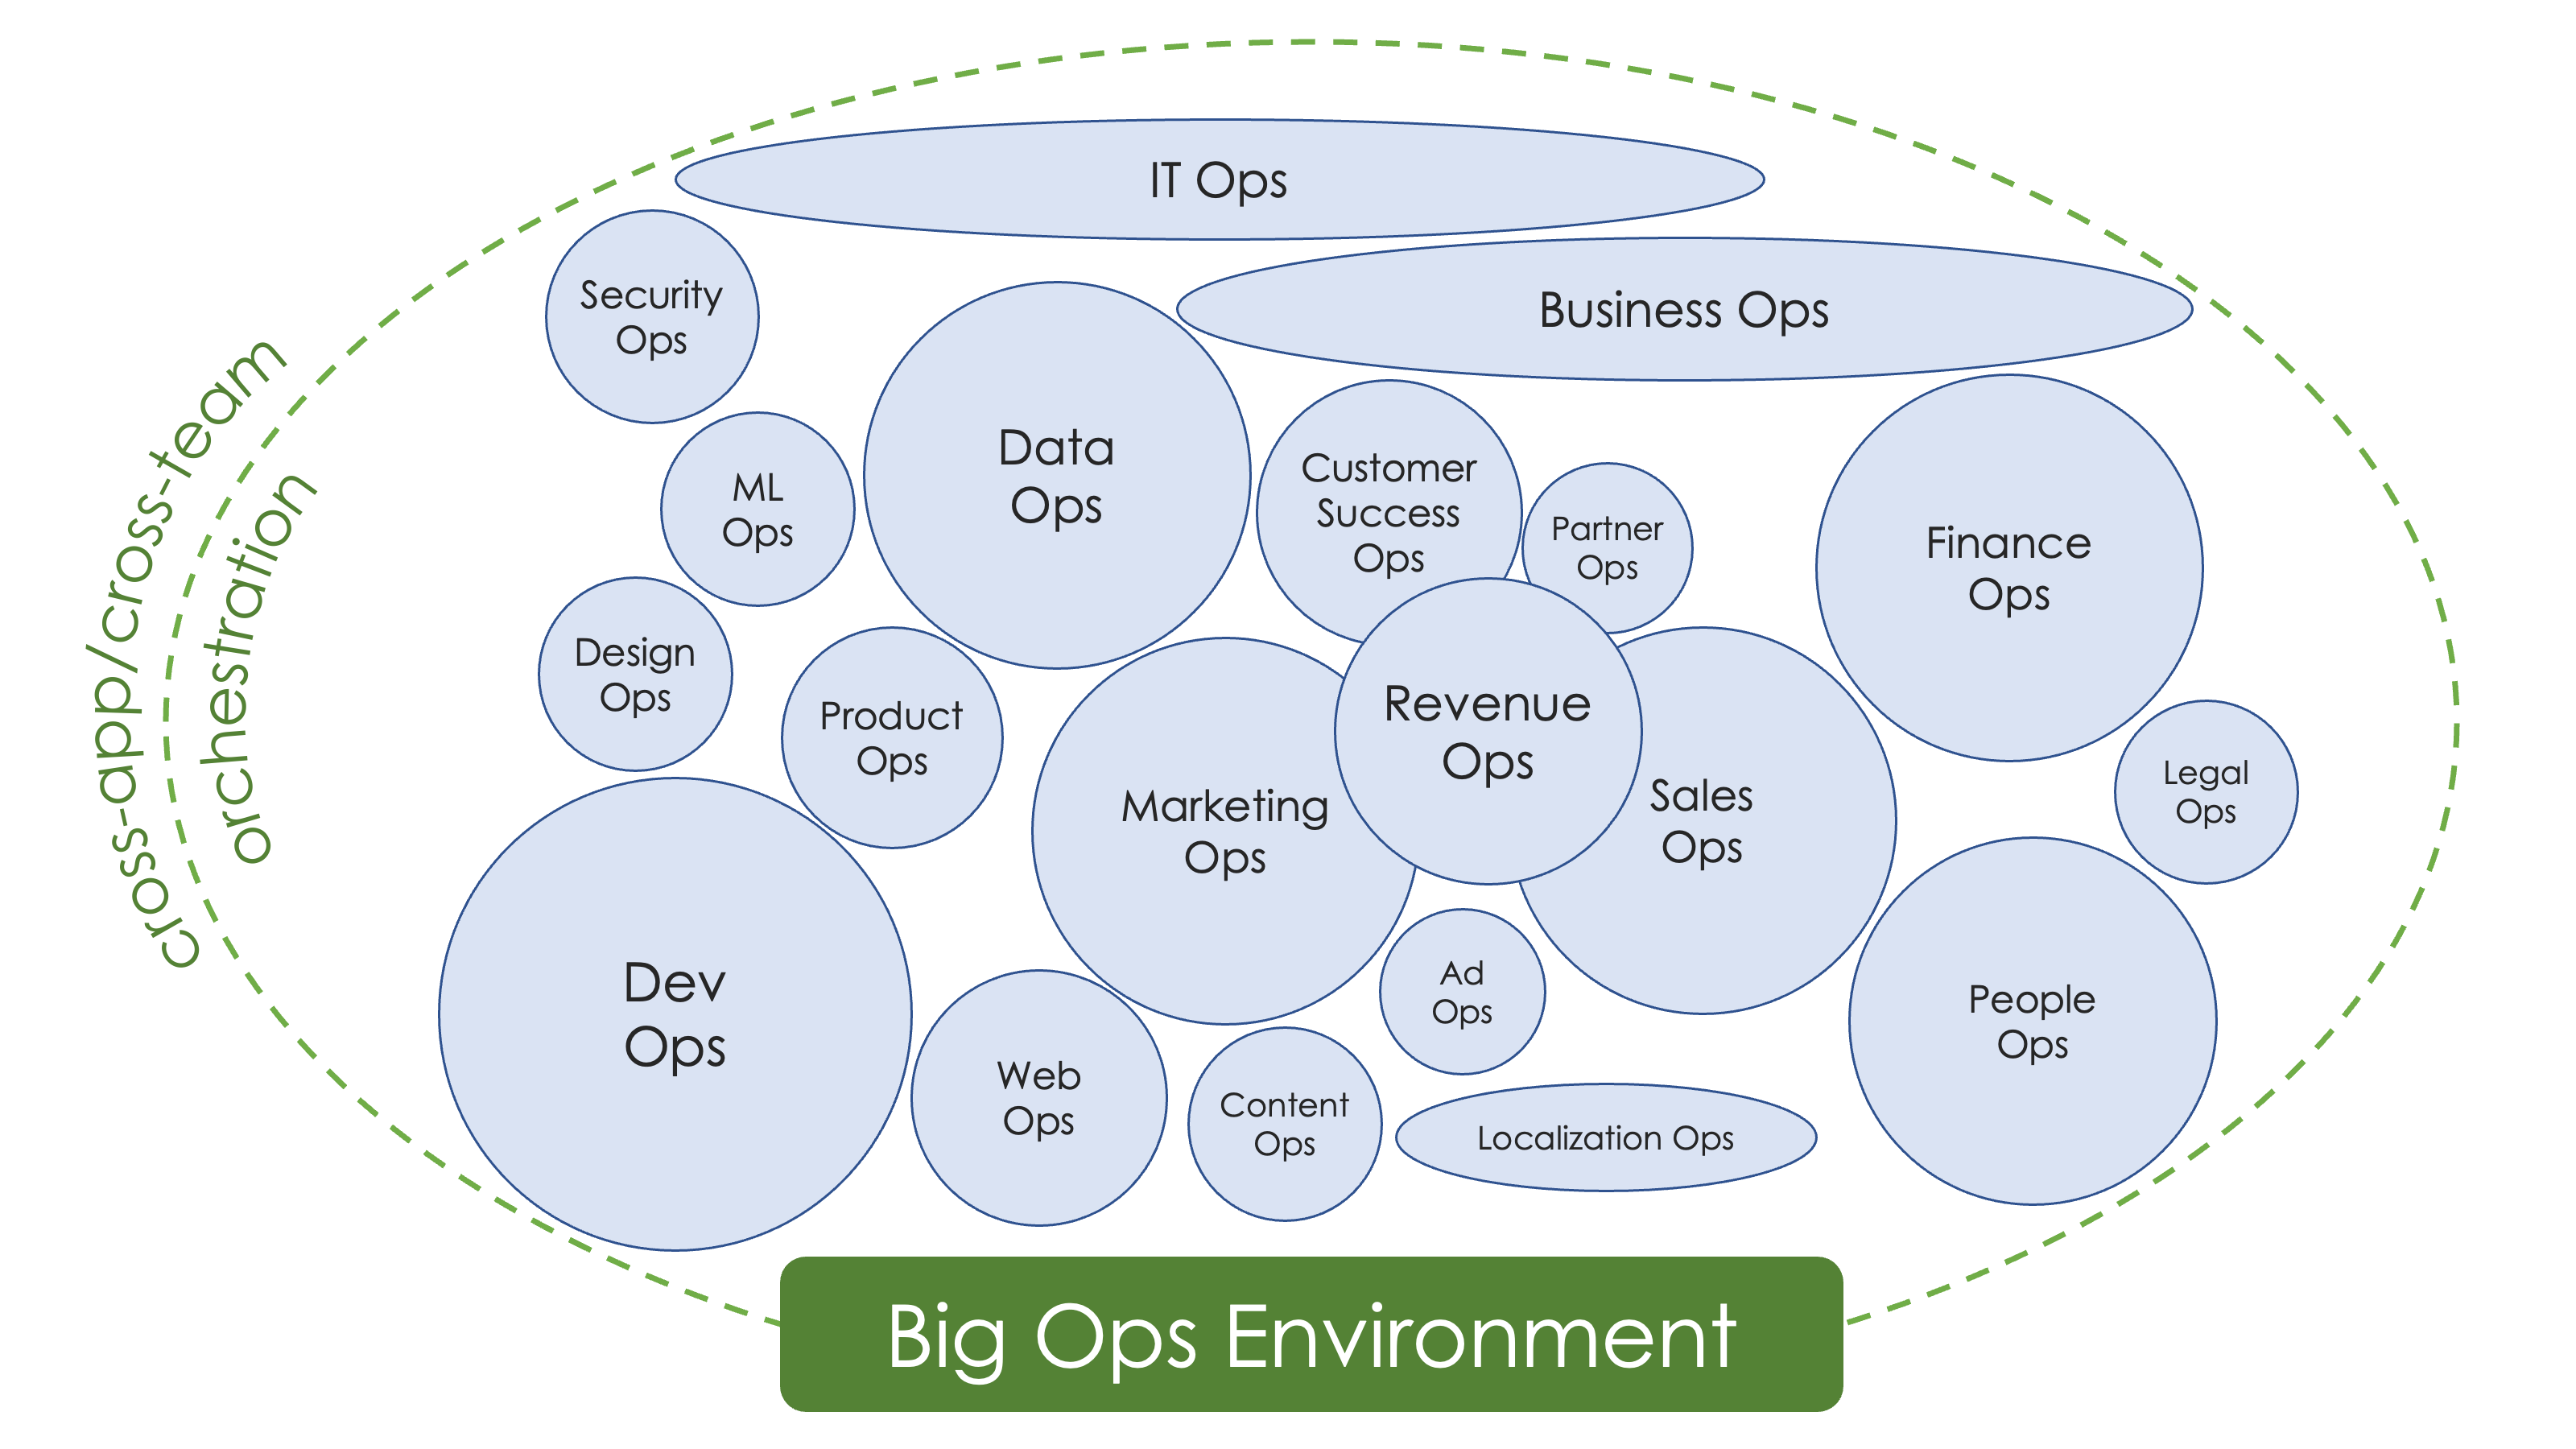 Growth & Proliferation of Ops Roles in a Big Ops Environment